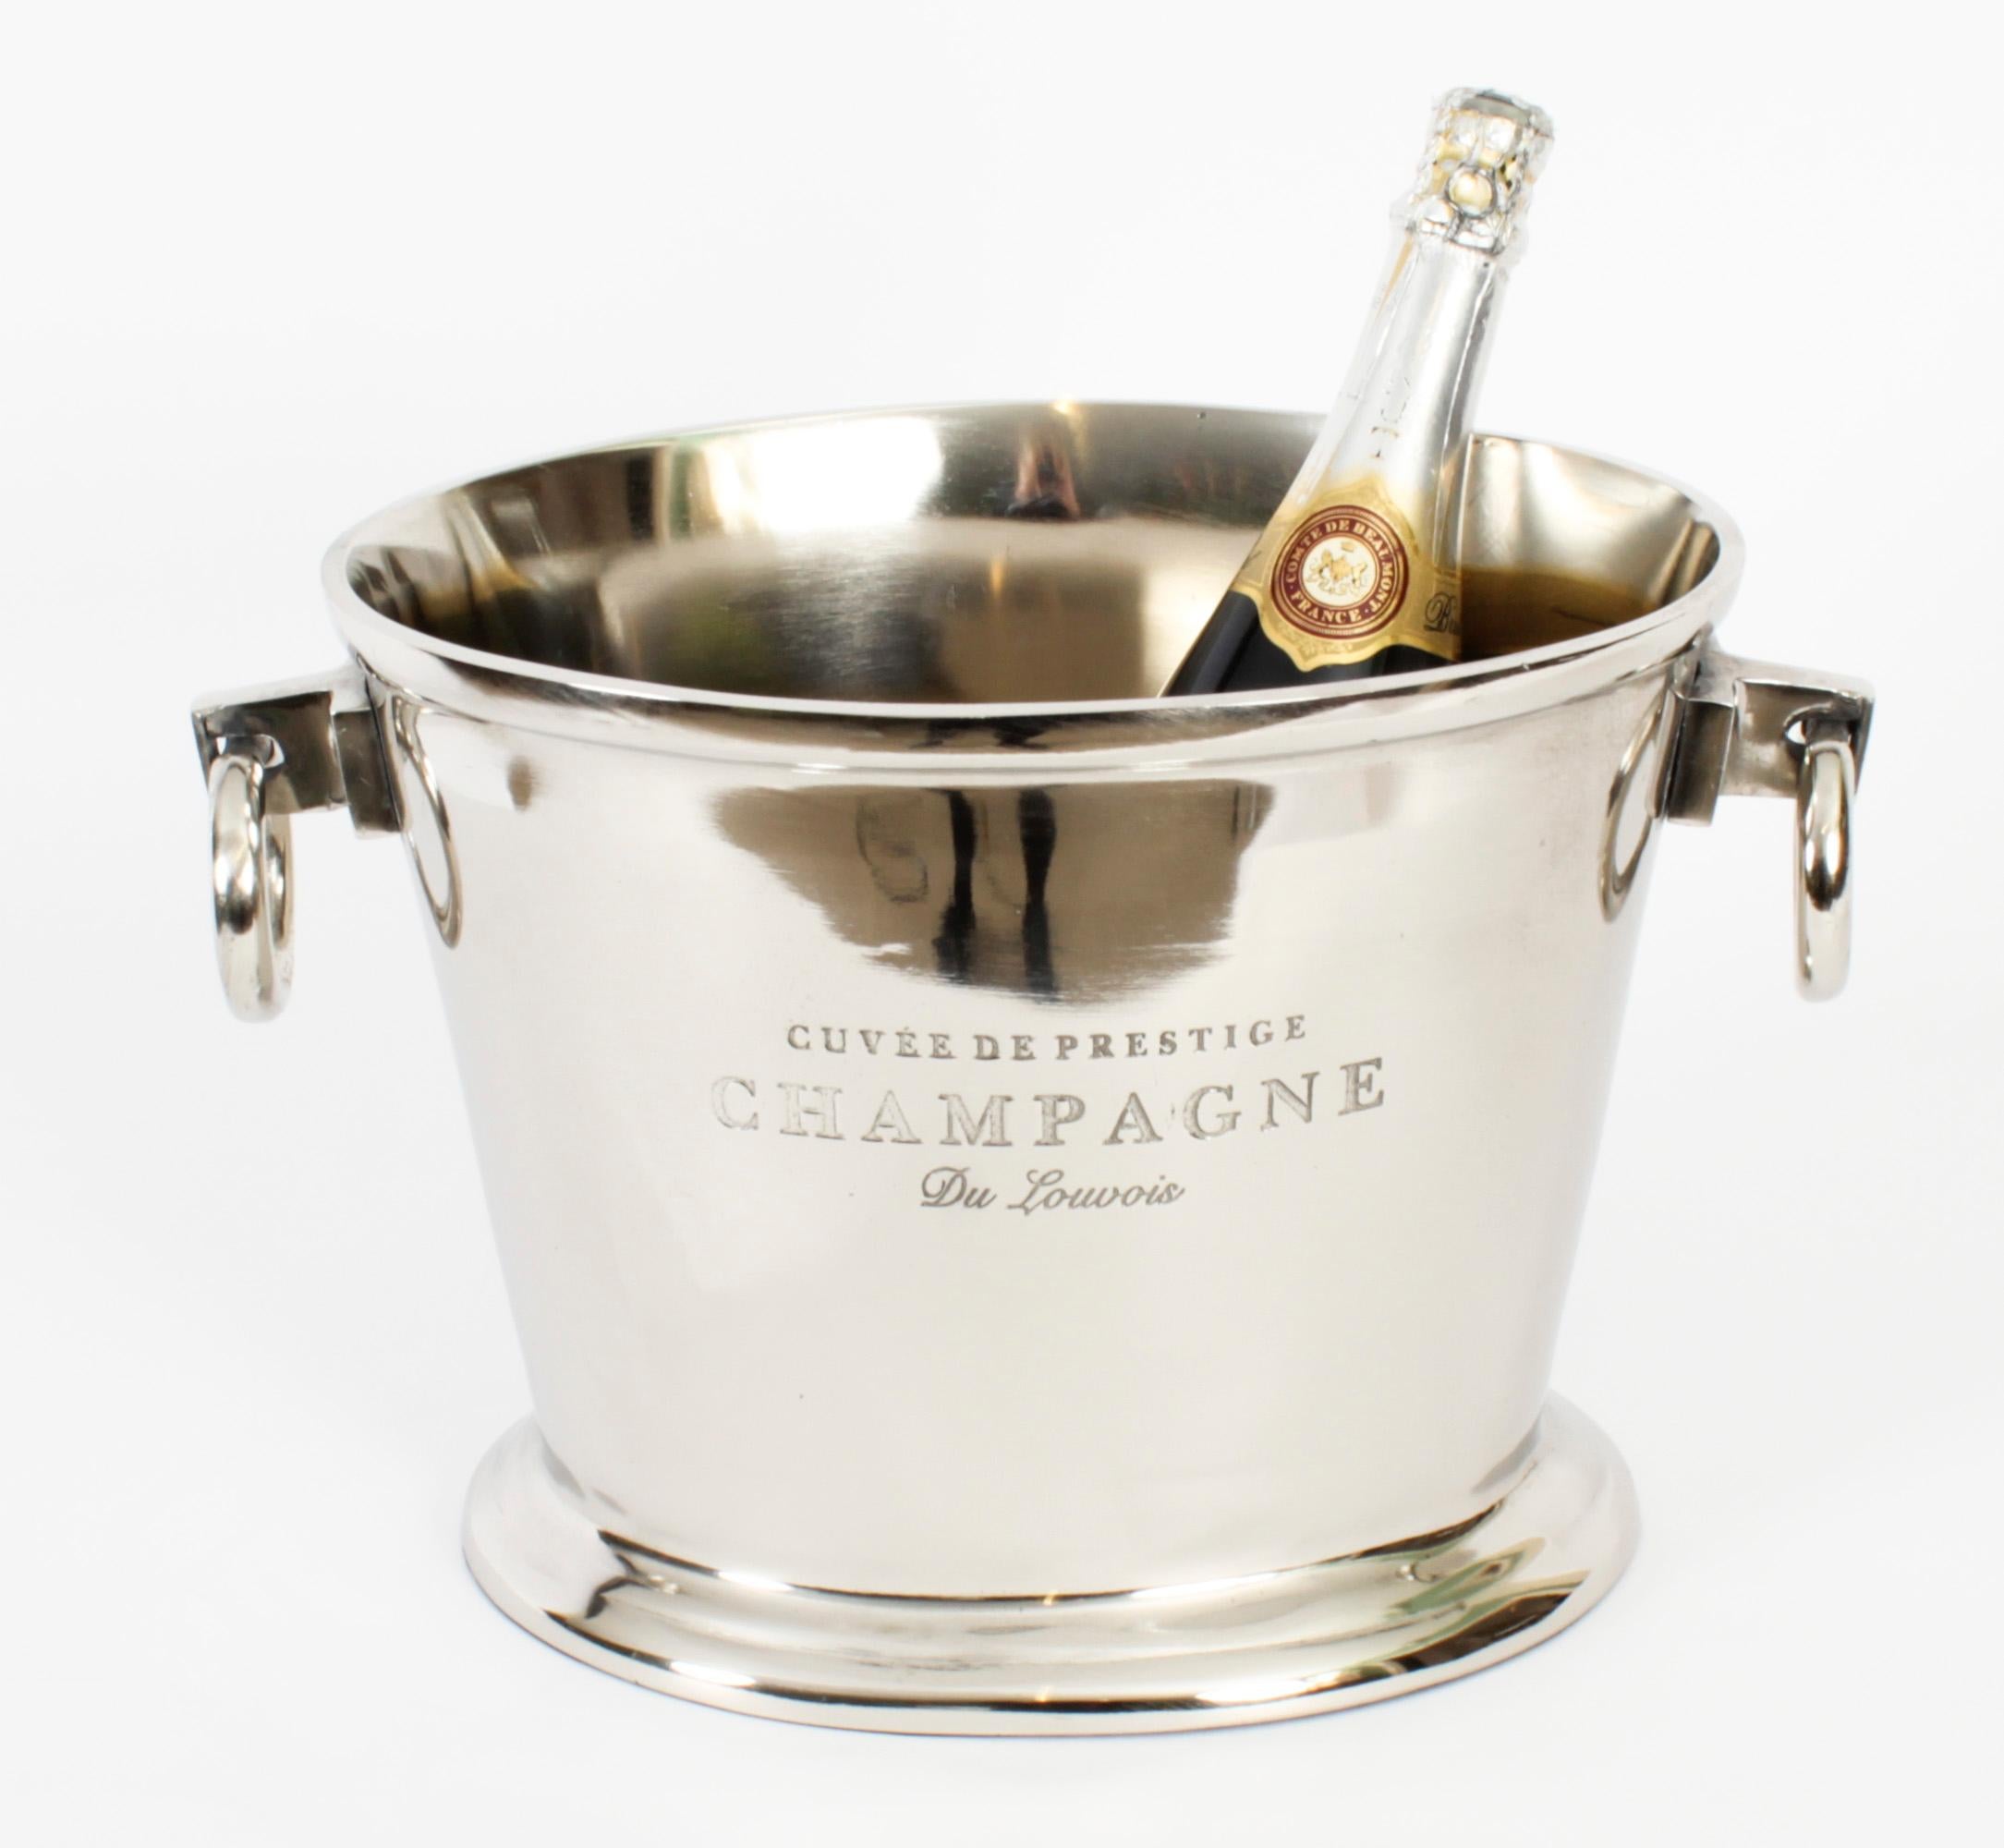 This is a gorgeous vintage nickel plated champagne cooler dating from the late 20th Century. 

It is engraved Cuvee de Prestige Champagne boldly on to the side.

The cooler has twin carrying handles and there is no mistaking the unique quality of